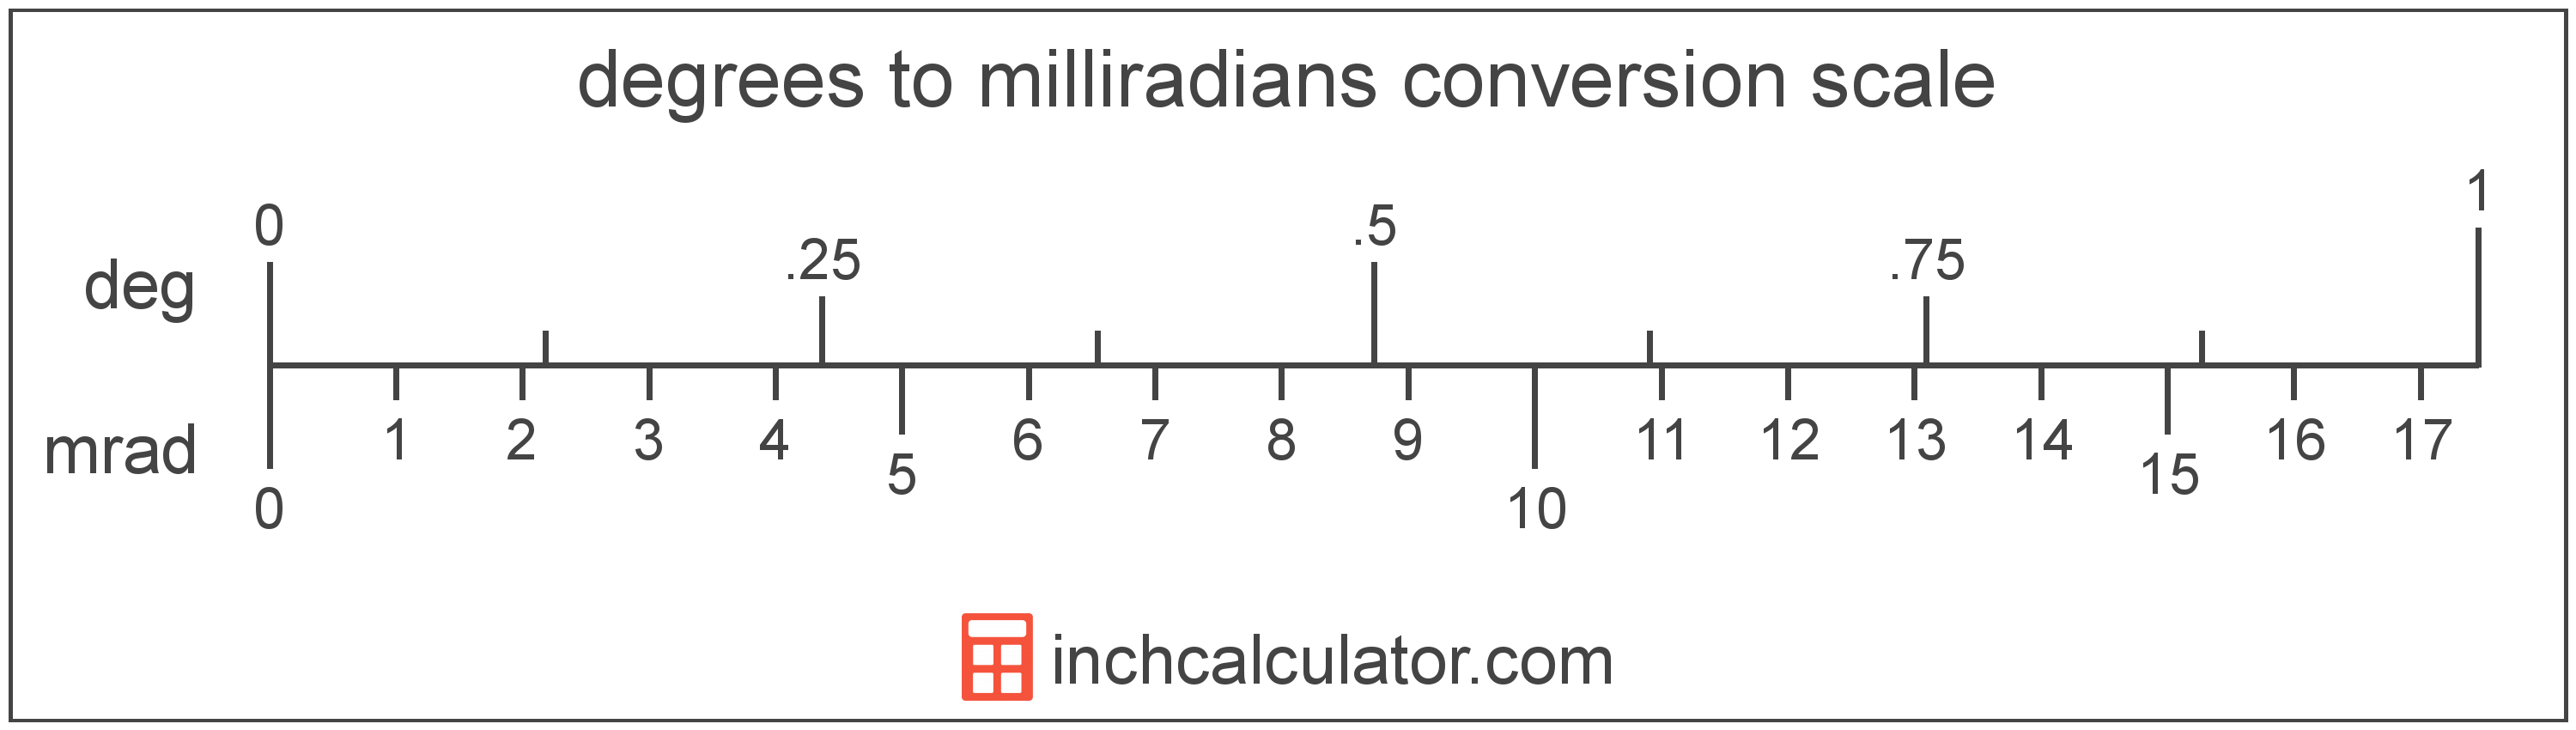 conversion scale showing degrees and equivalent milliradians angle values